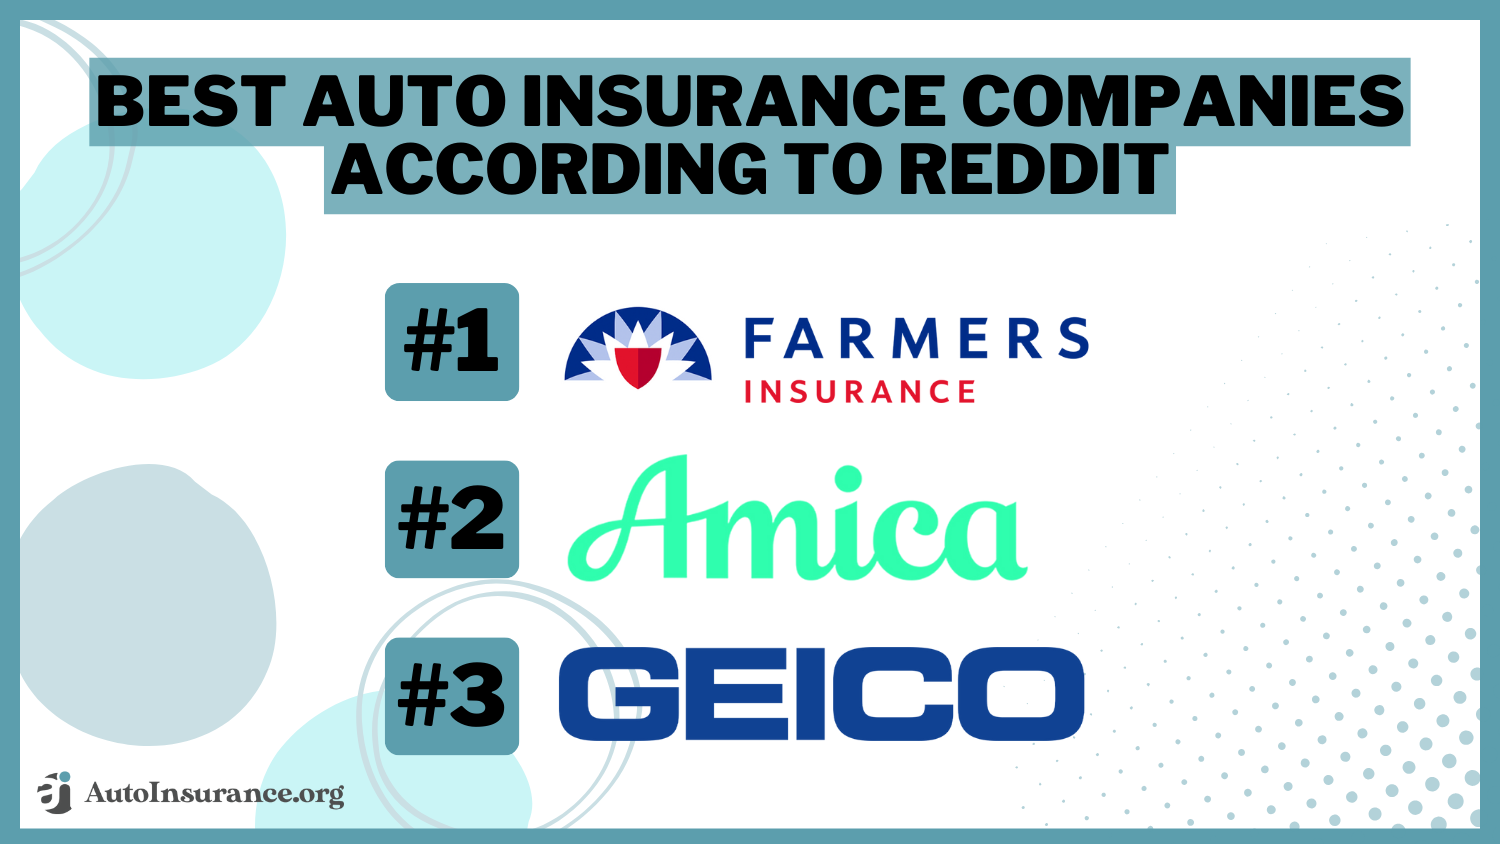 best auto insurance companies according to Reddit: Farmers, Amica, Geico